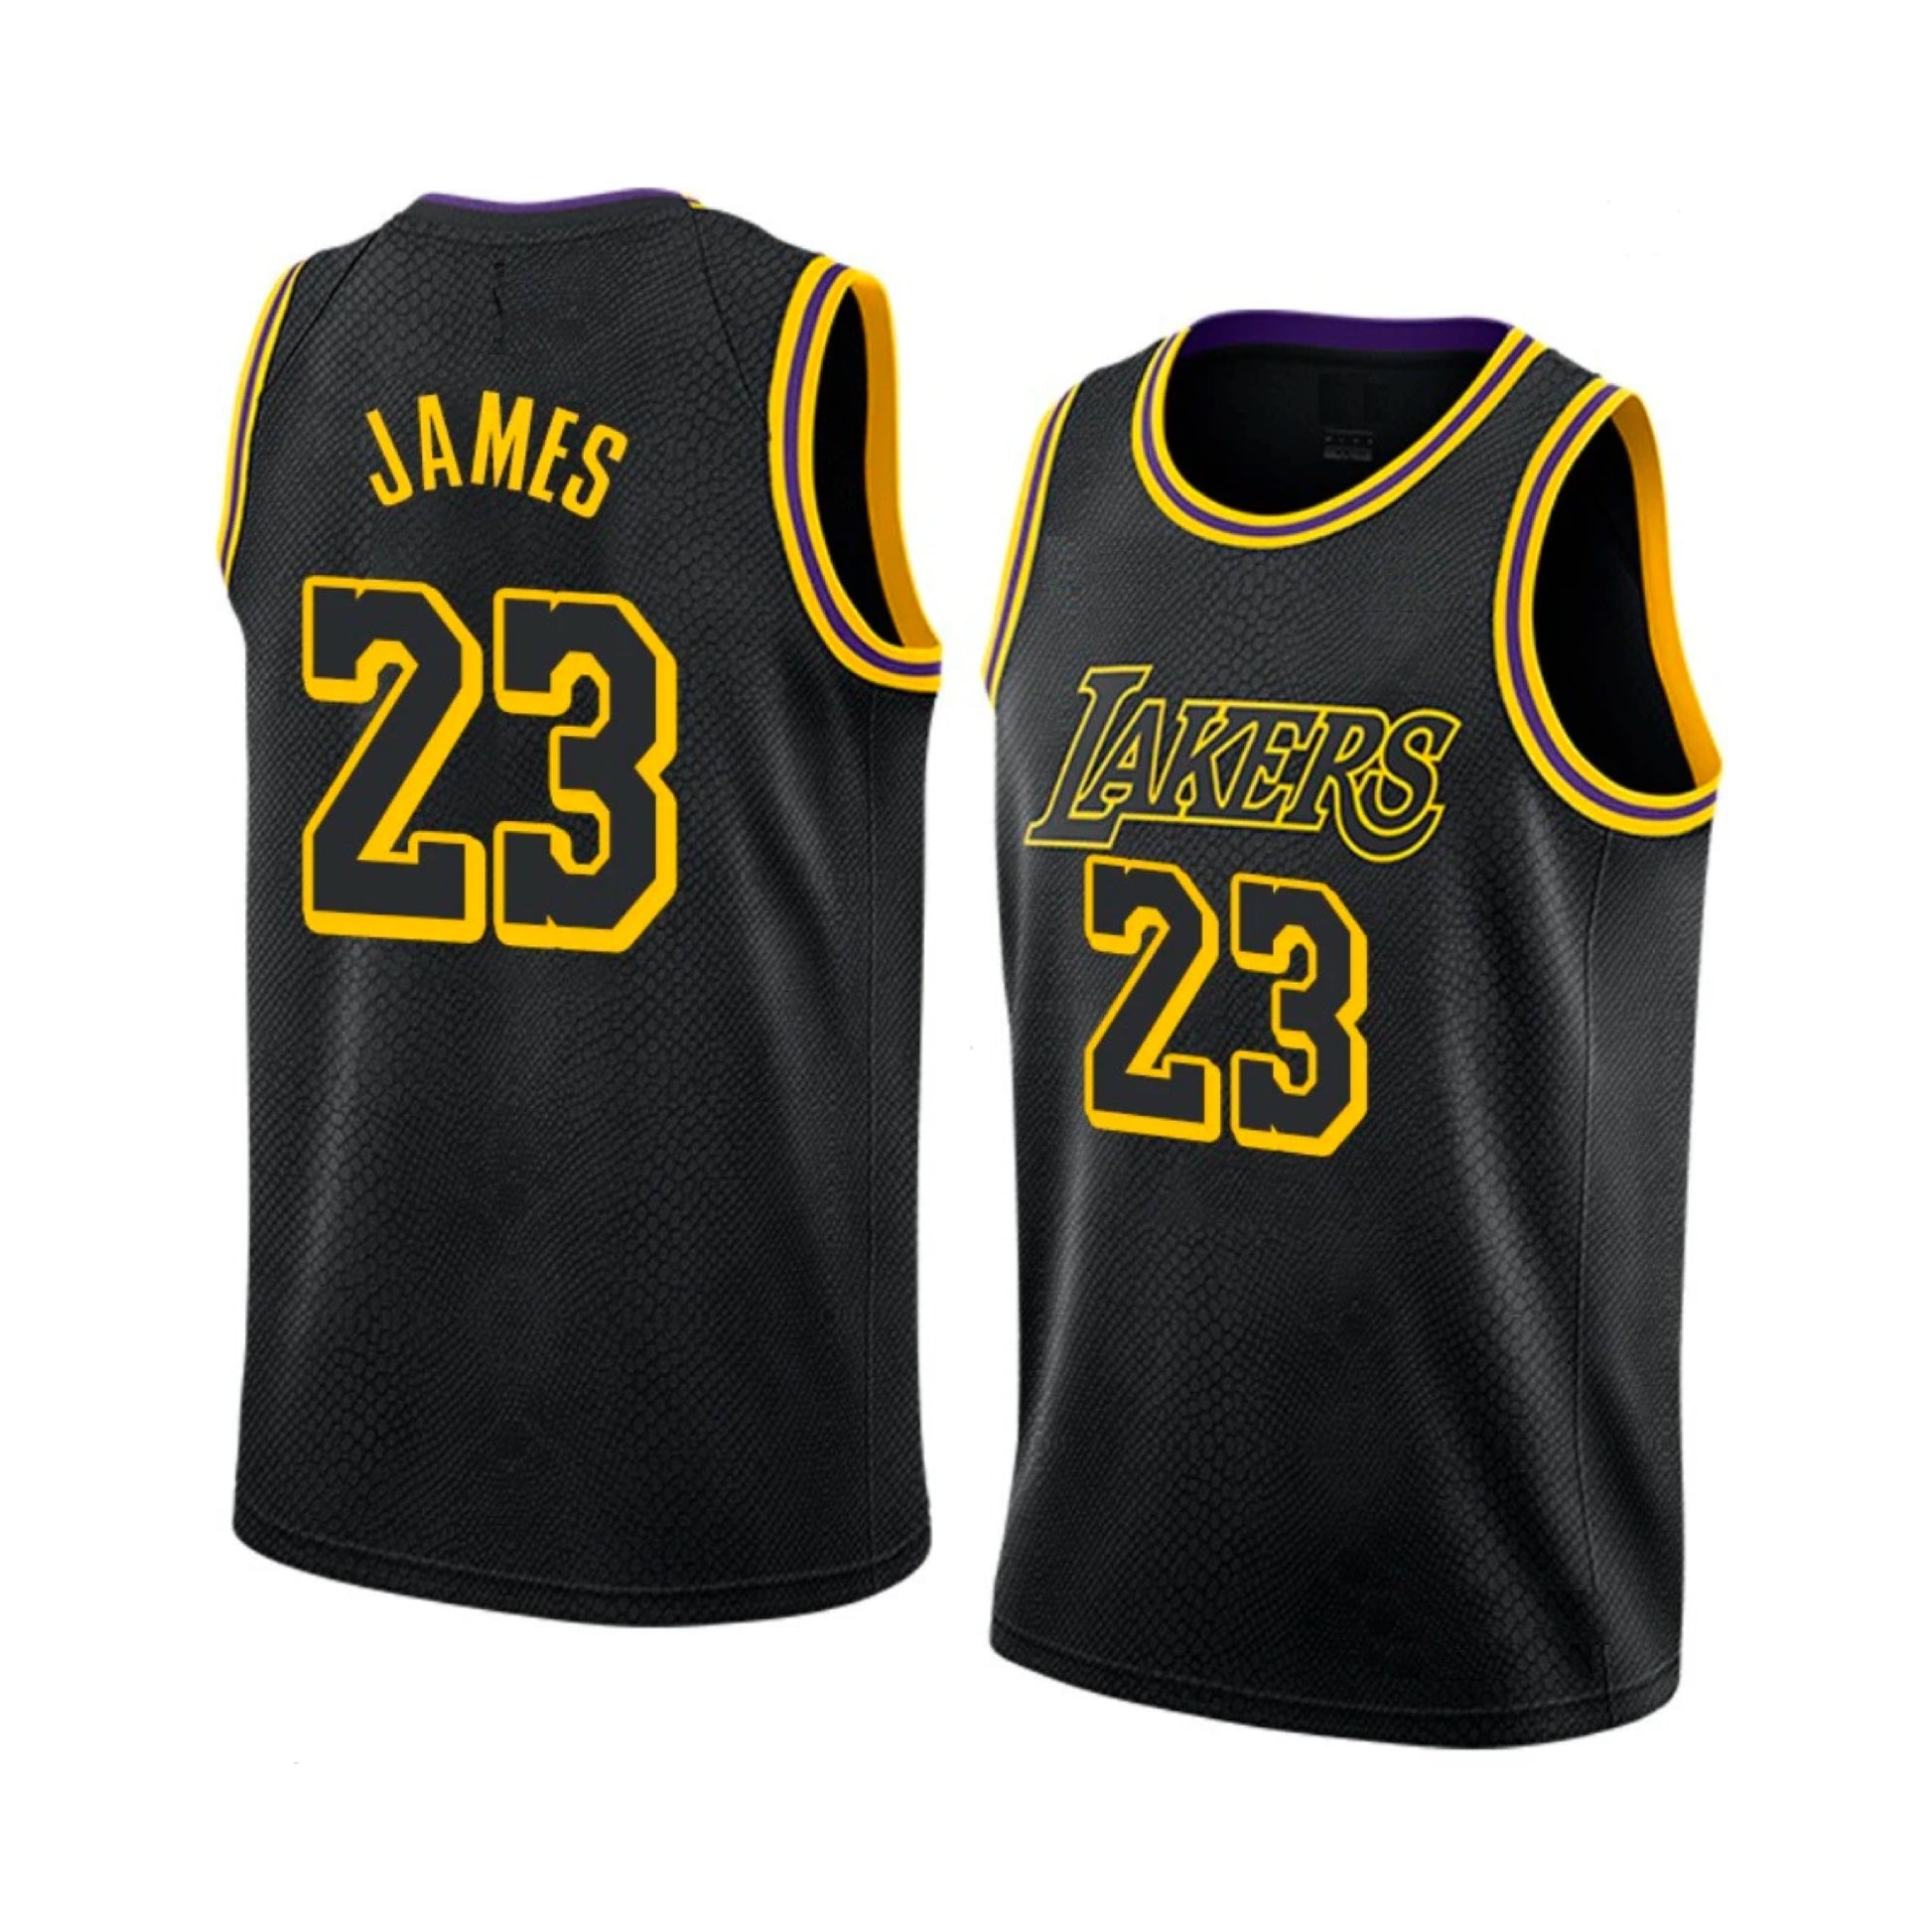 lebron lakers jersey black and gold